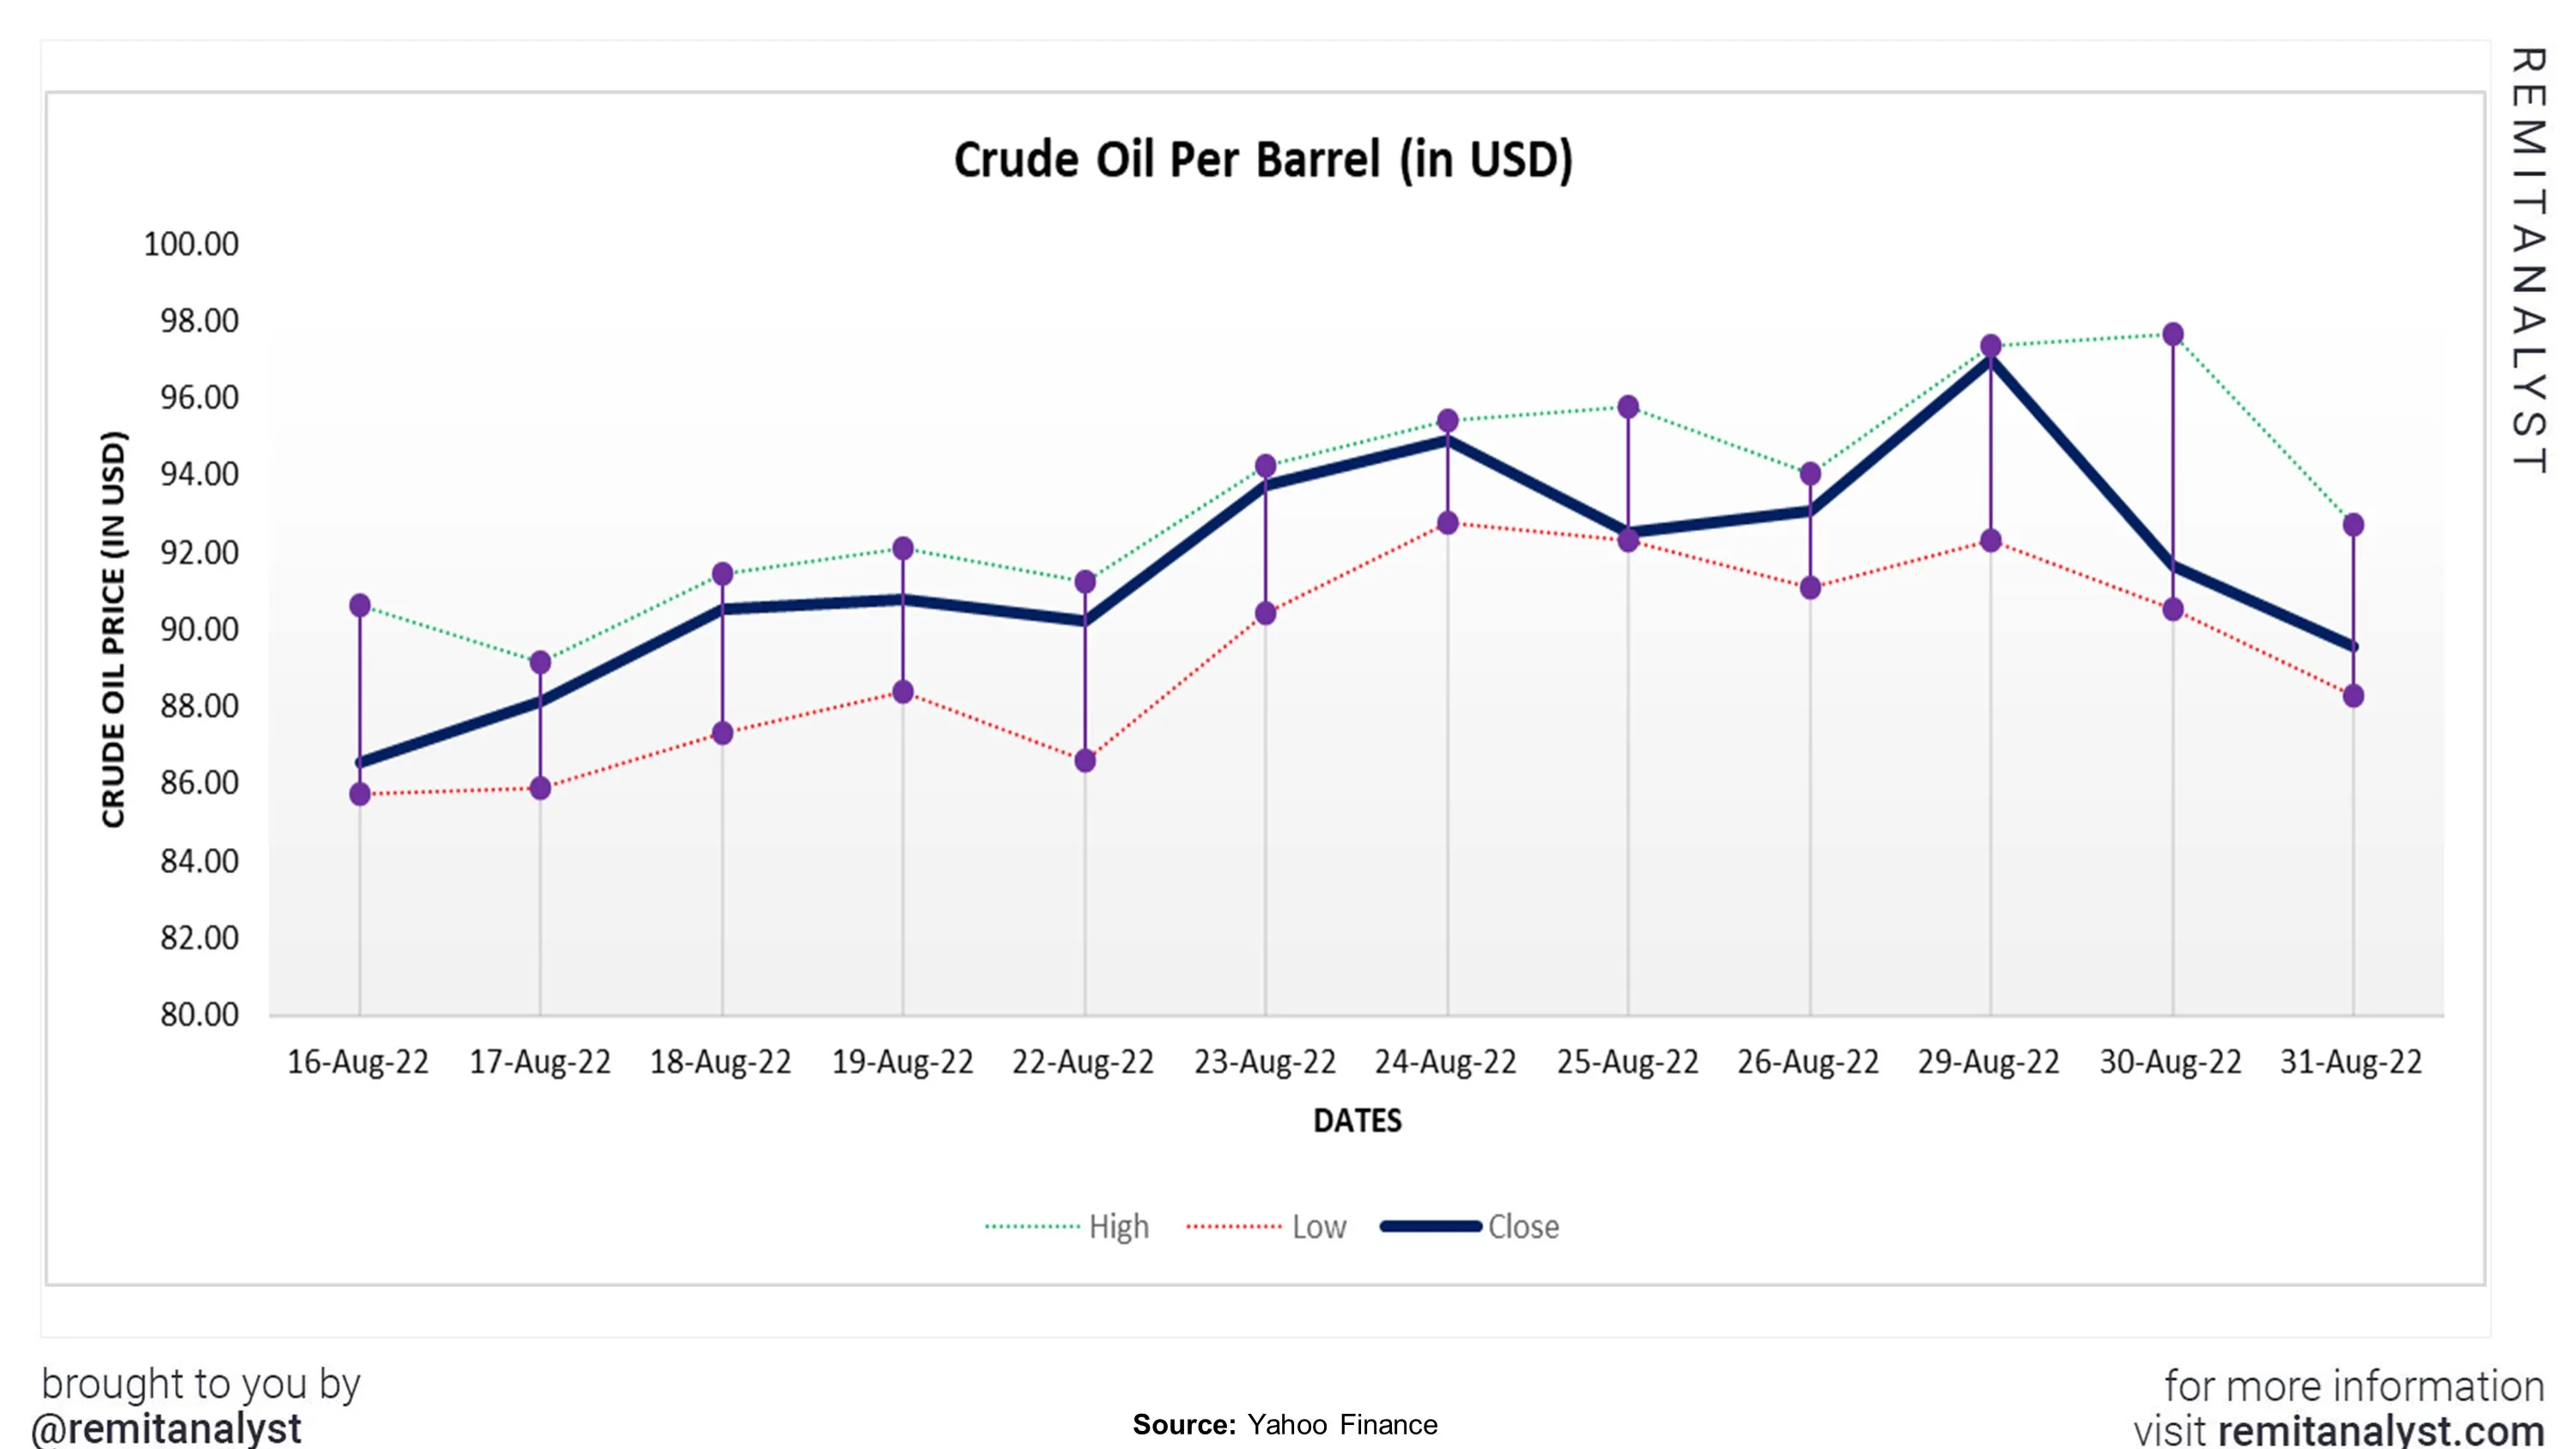 Crude-Oil-Prices-from-08-16-2022-to-08-31-2022